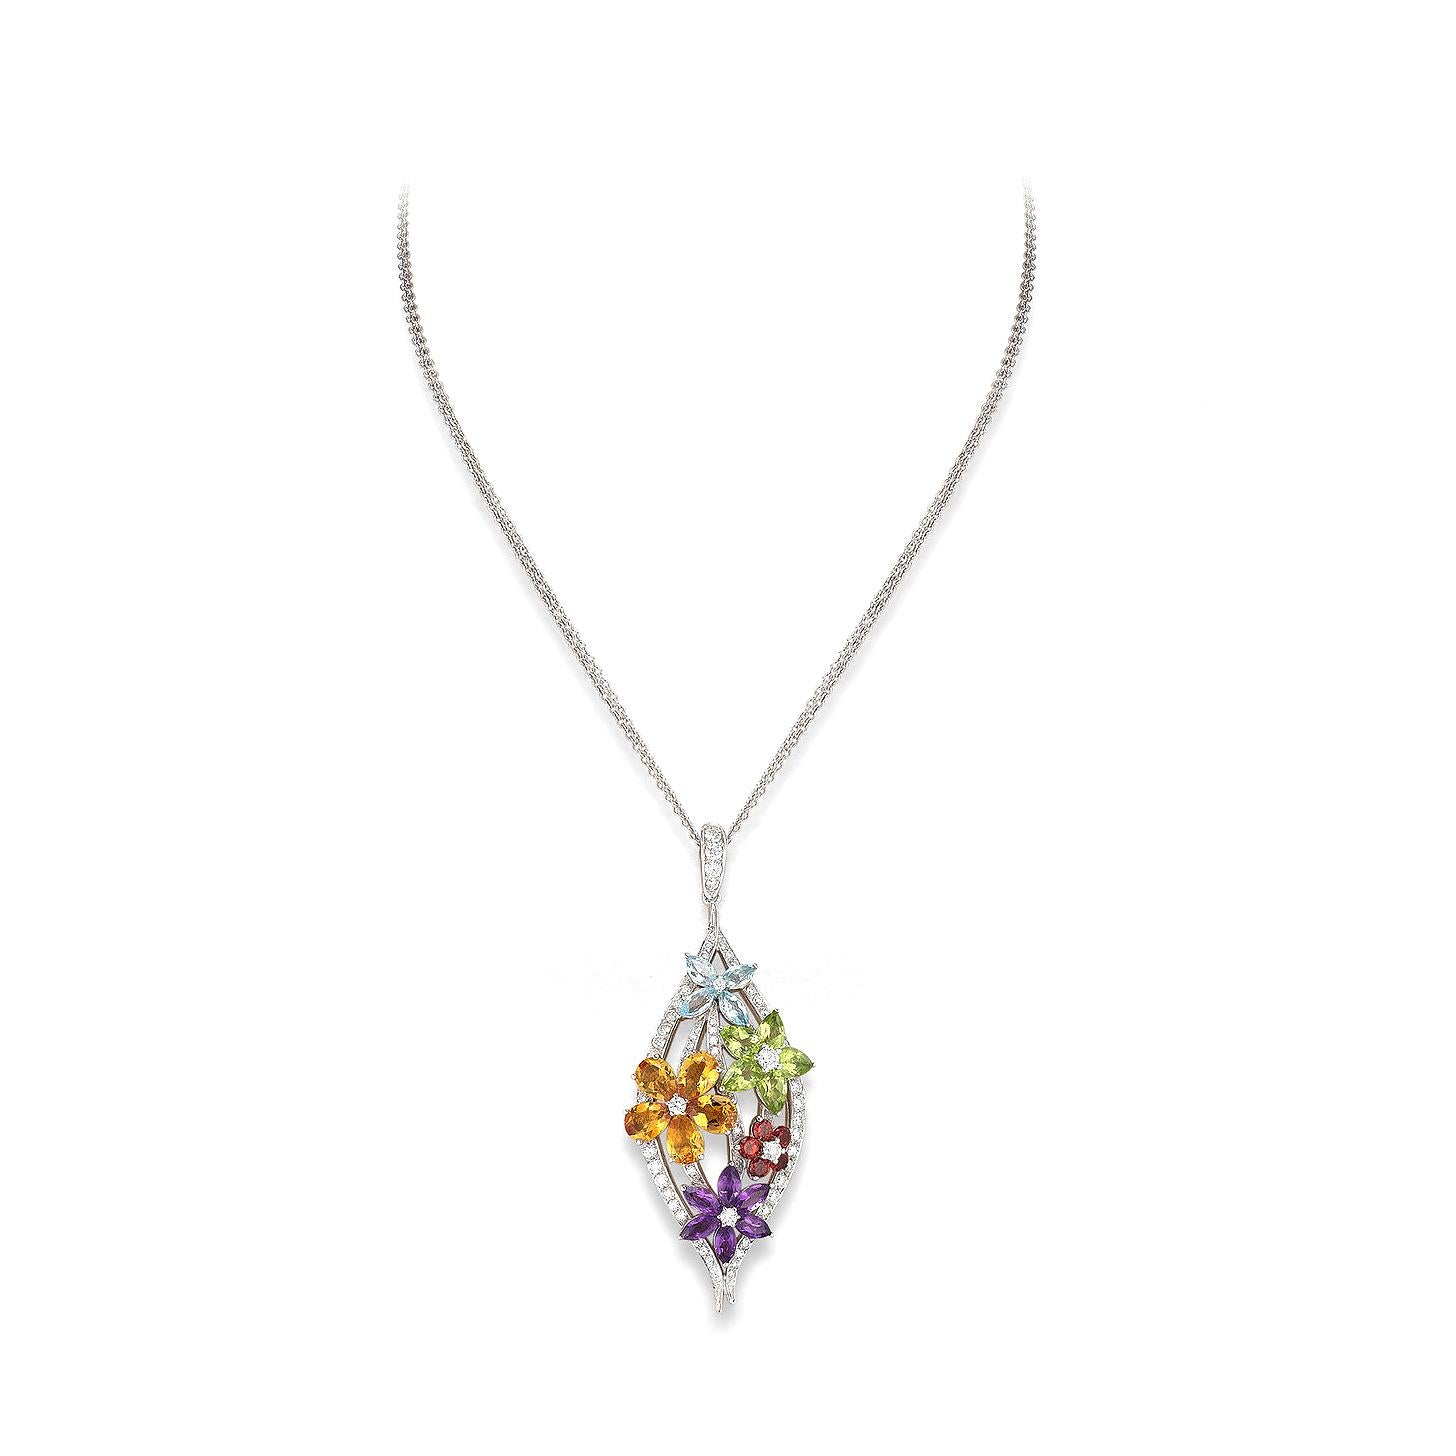 Flowers pendant in 18kt white gold set with peridots topaz and garnets 5.15 cts and 64 diamonds 1.49 cts    